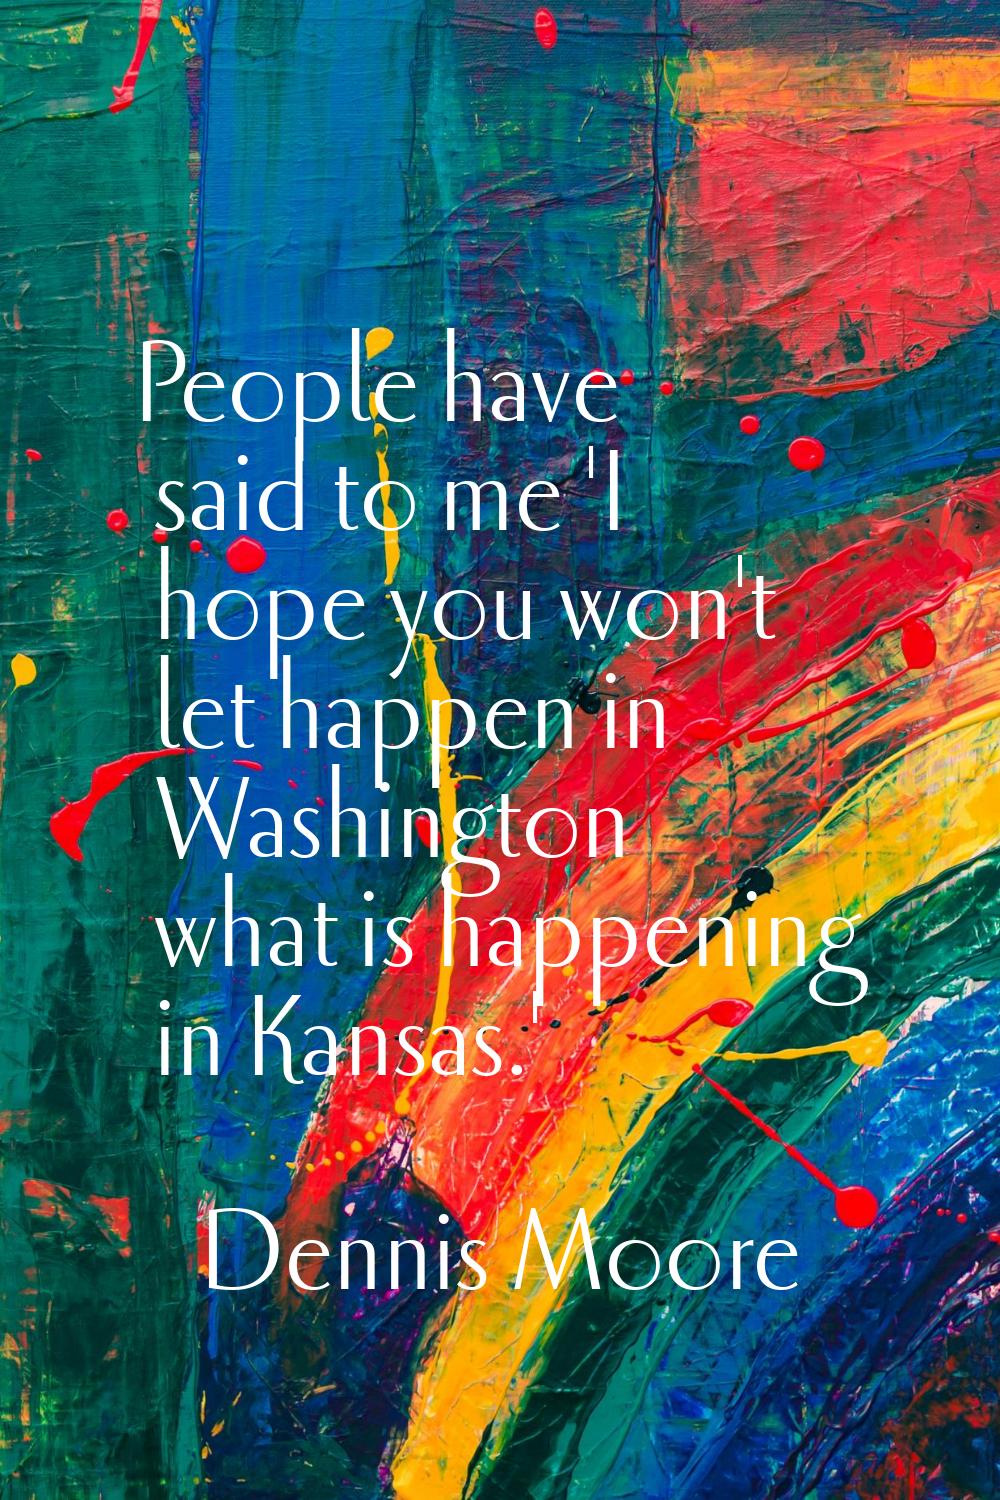 People have said to me 'I hope you won't let happen in Washington what is happening in Kansas.'